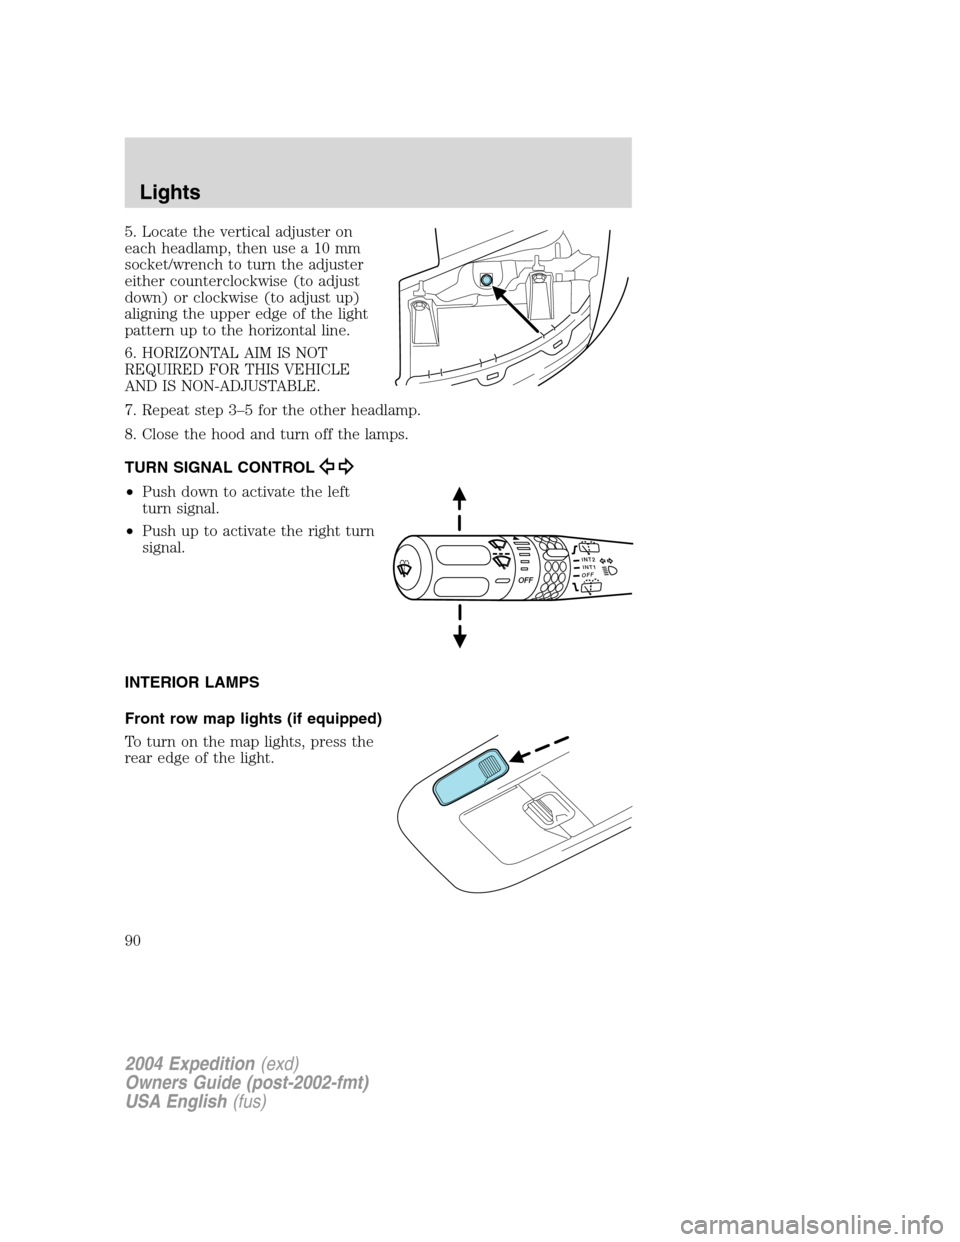 FORD EXPEDITION 2004 2.G Owners Manual 5. Locate the vertical adjuster on
each headlamp, then use a 10 mm
socket/wrench to turn the adjuster
either counterclockwise (to adjust
down) or clockwise (to adjust up)
aligning the upper edge of th